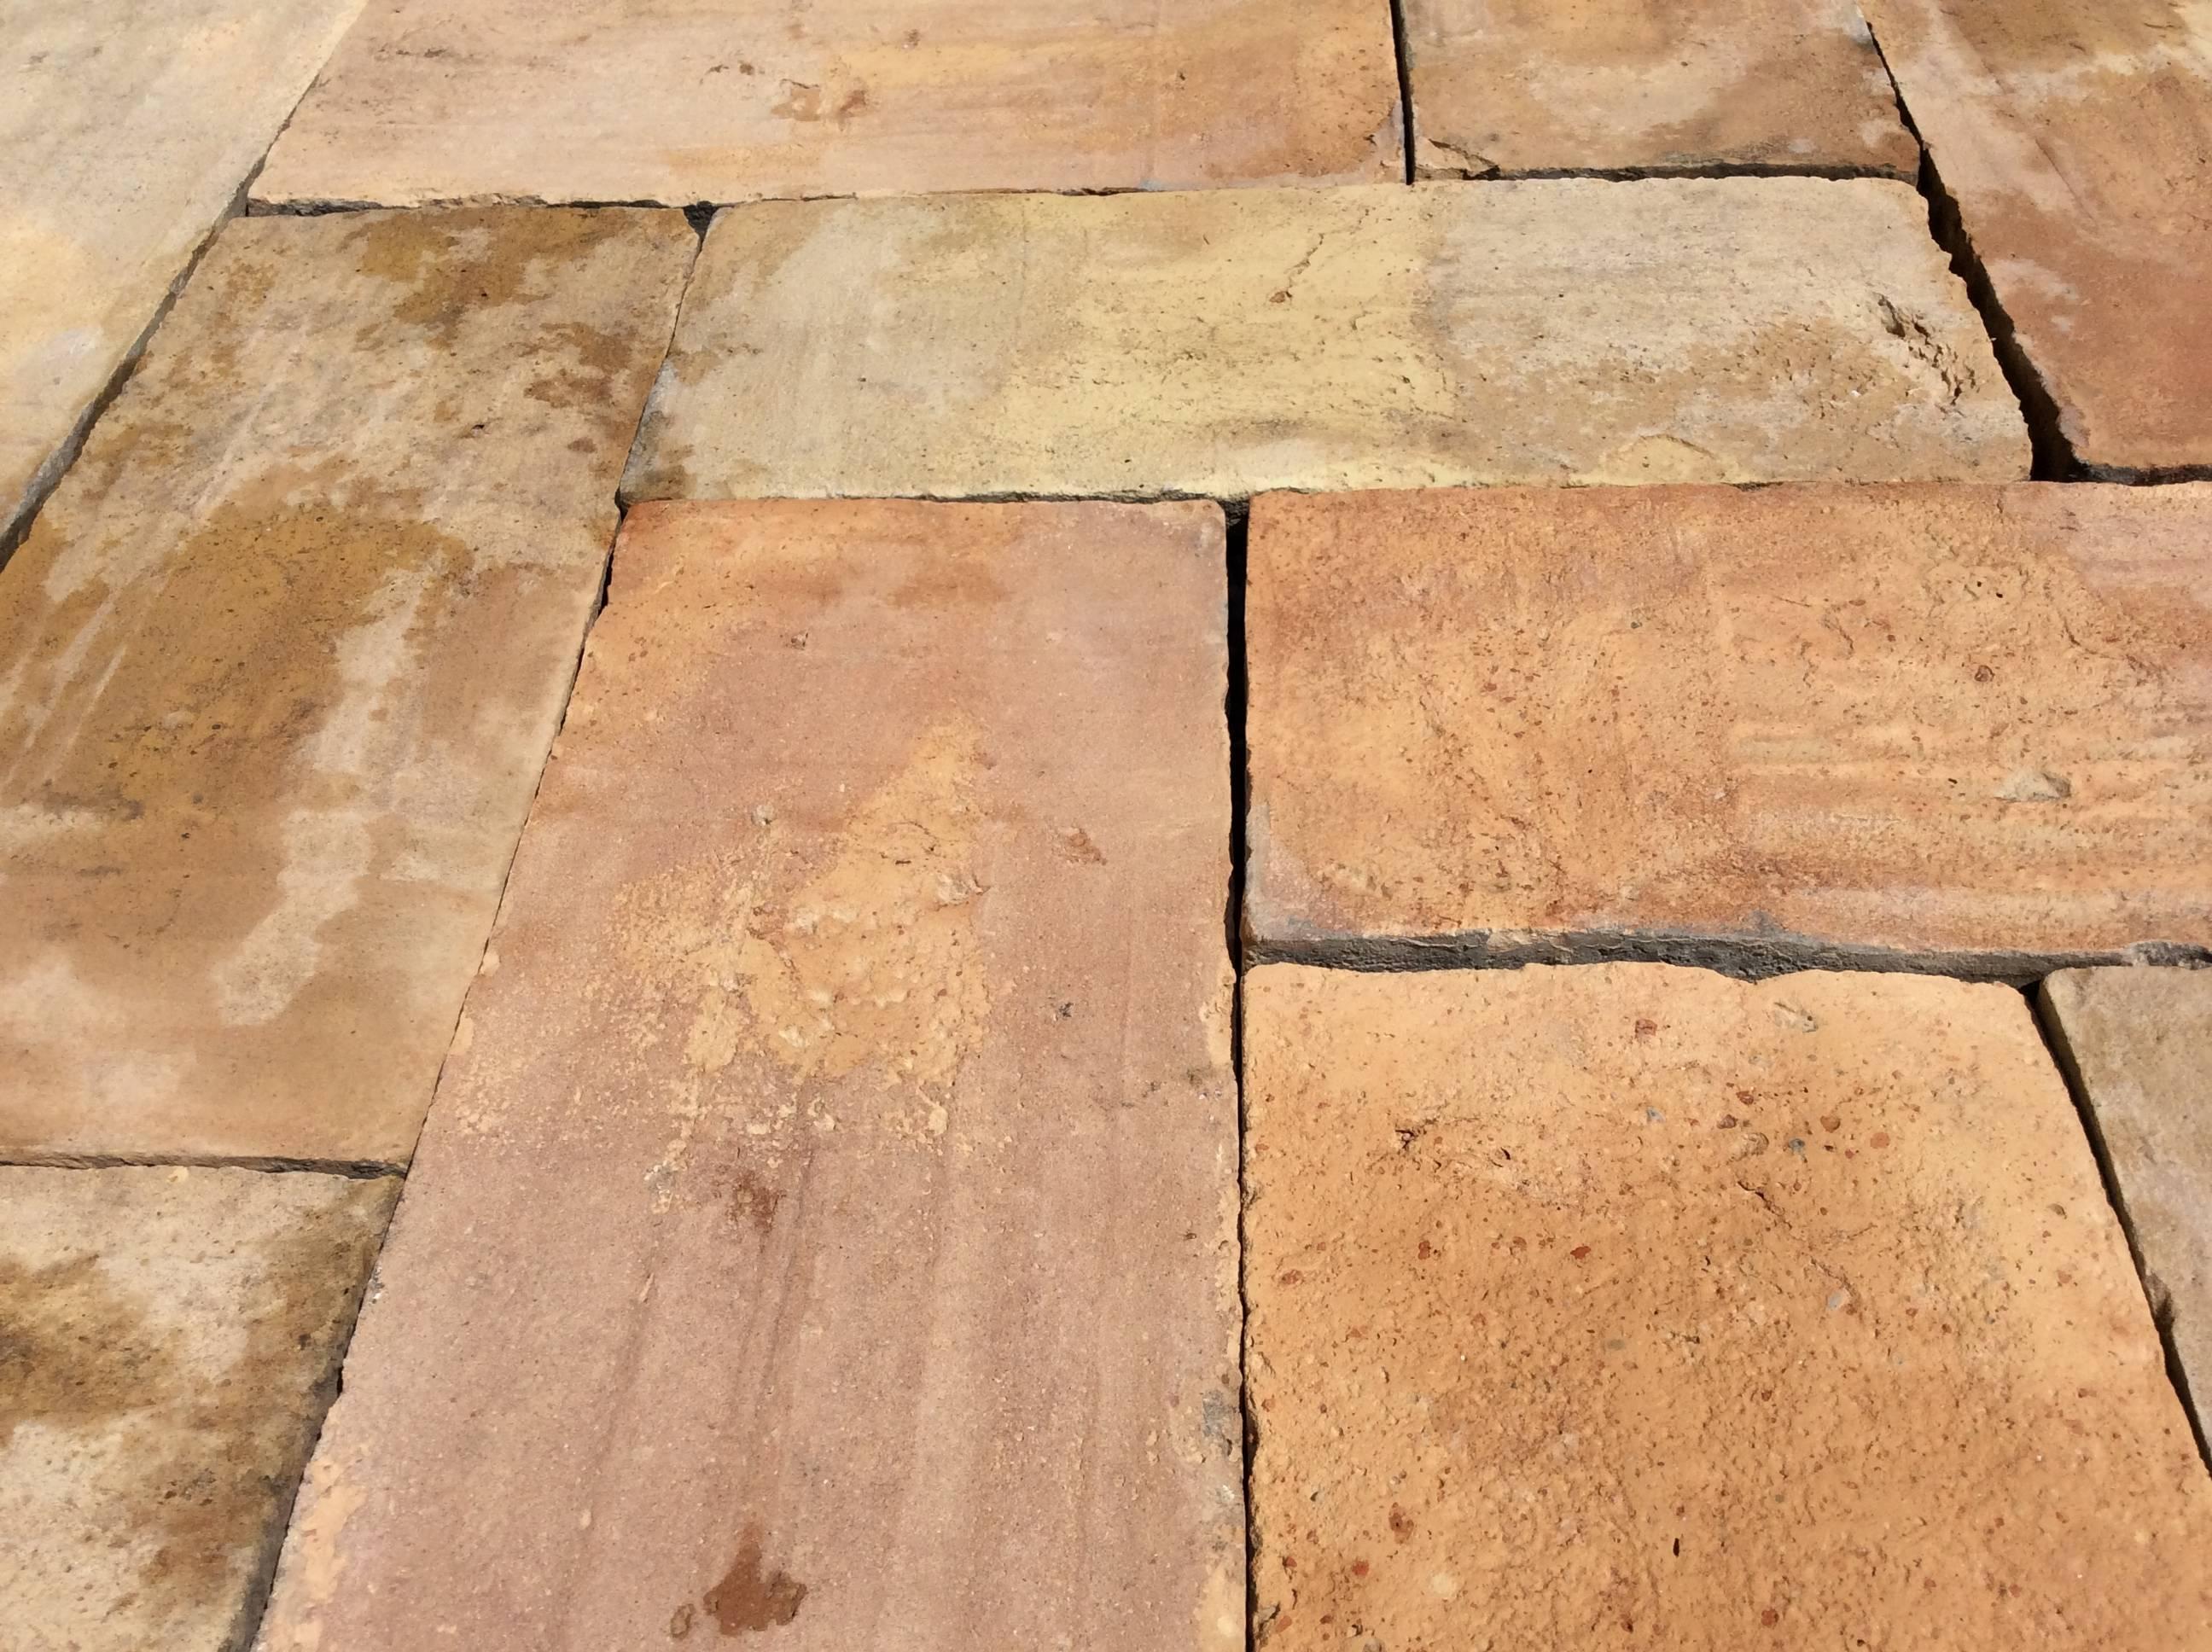 Antique reclaimed terra cotta from French farm houses in Provence, our antique, handmade terra cotta tiles combine the weathered patina, these reclaimed terra cotta tiles are more 100 years old. Available in different shapes and sizes, these tiles